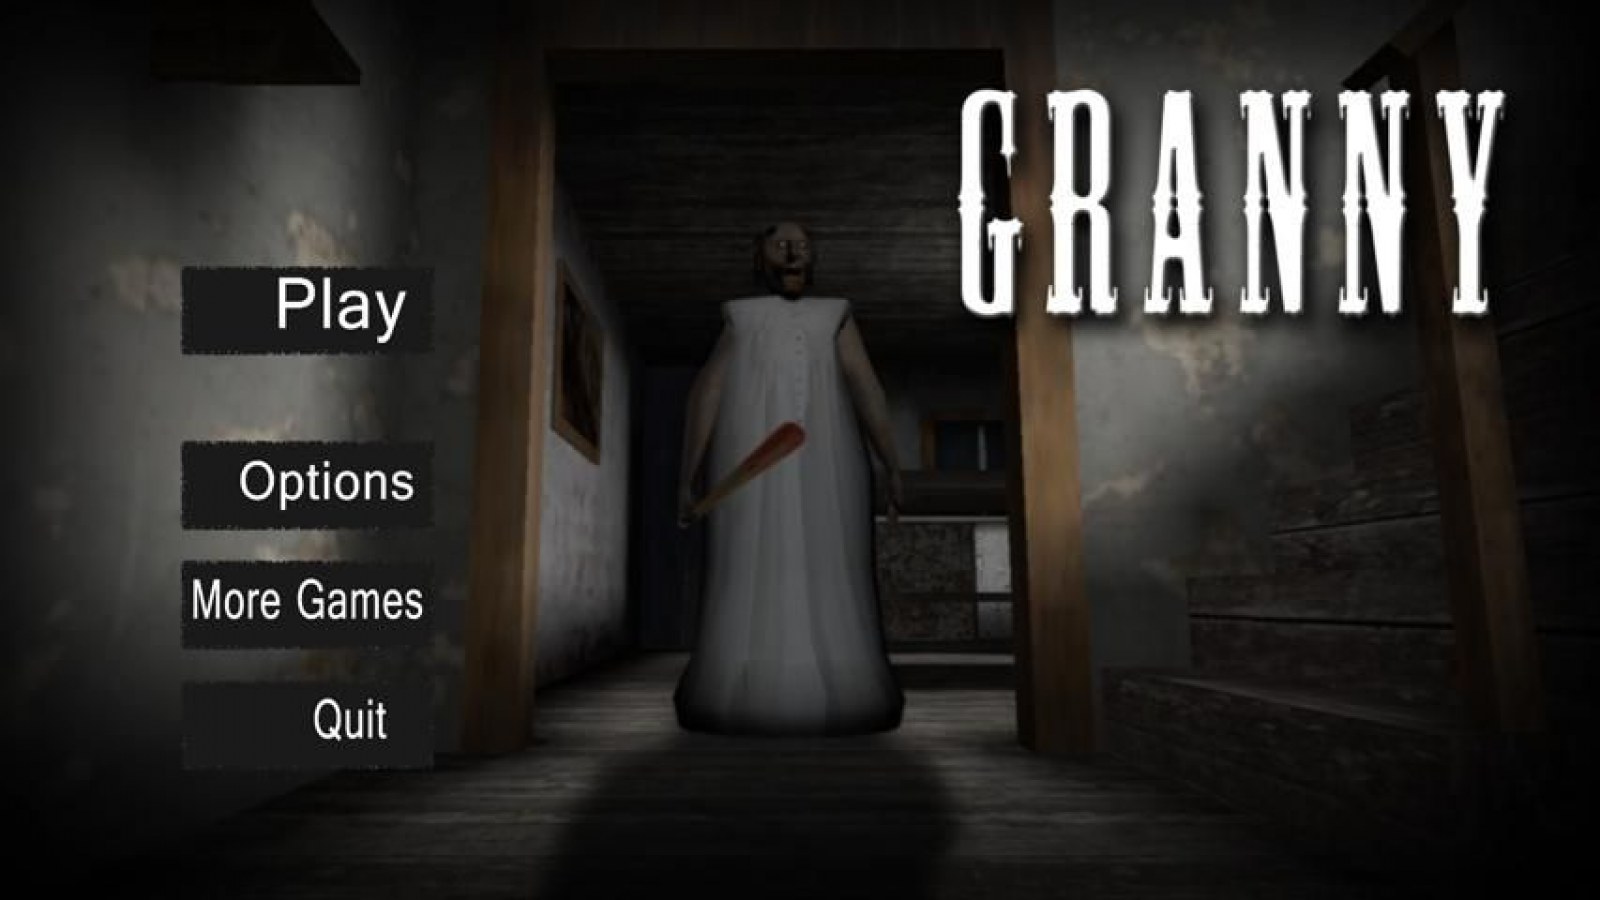 How To Beat Granny Horror Game Tips Steps Strategy For Getting Out Of The House Alive - roblox unblocked games 88